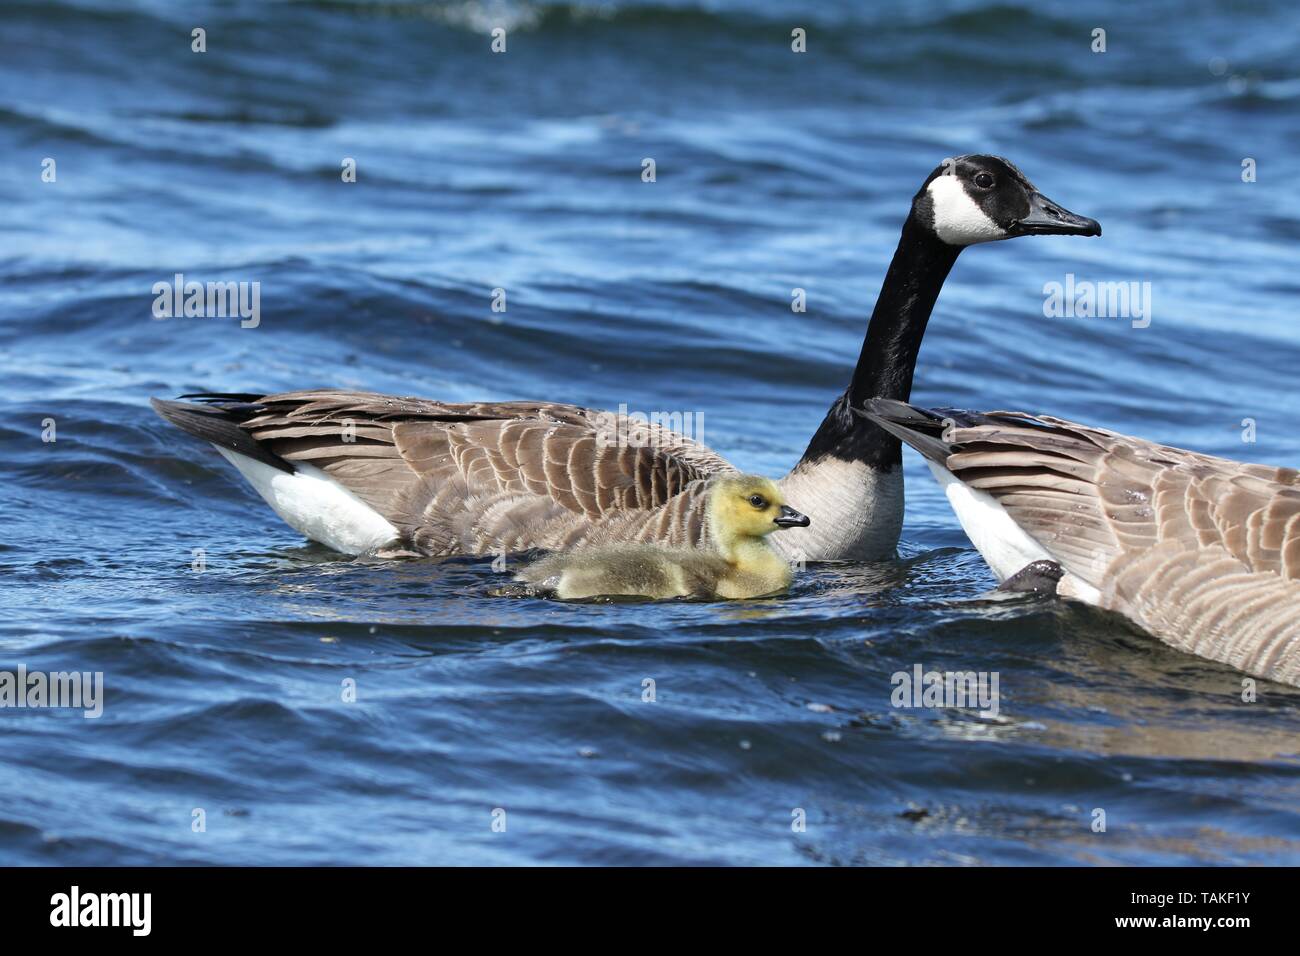 A Pair of Canada Geese Branta canadensis swimming on a blue lake with their young gosling Stock Photo